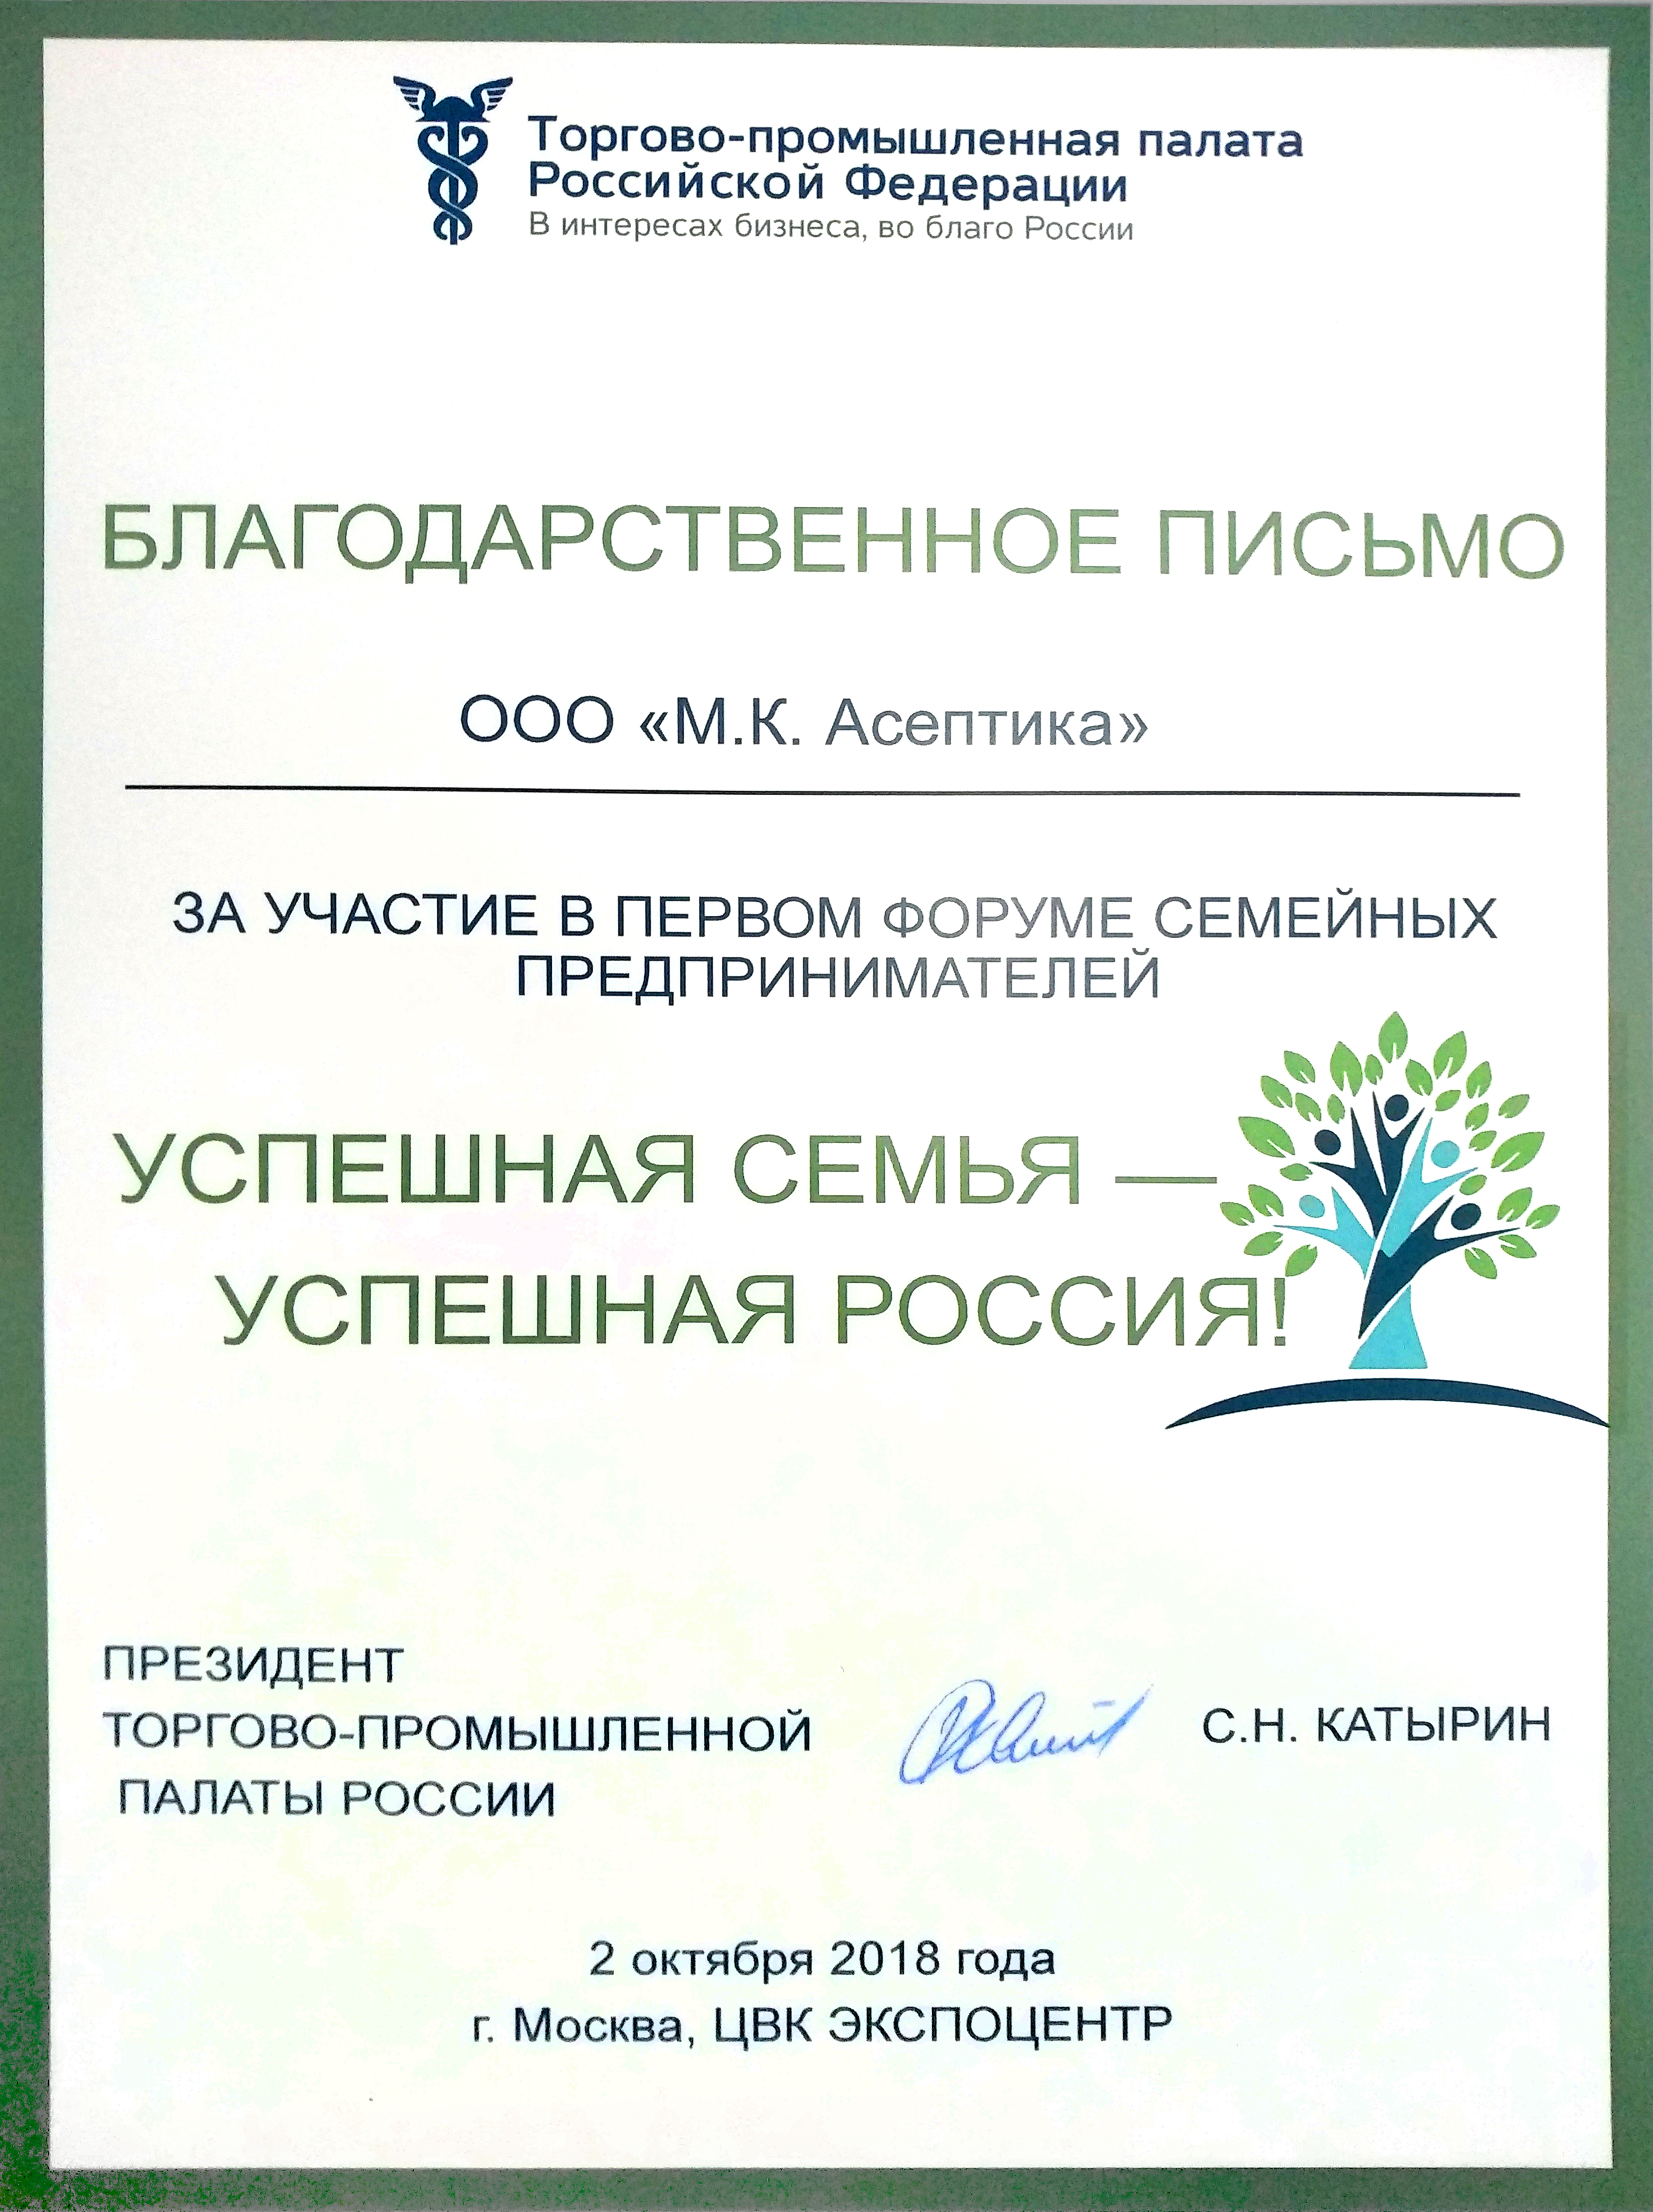 Letter of Appreciation for participation in the first forum of family entrepreneurs